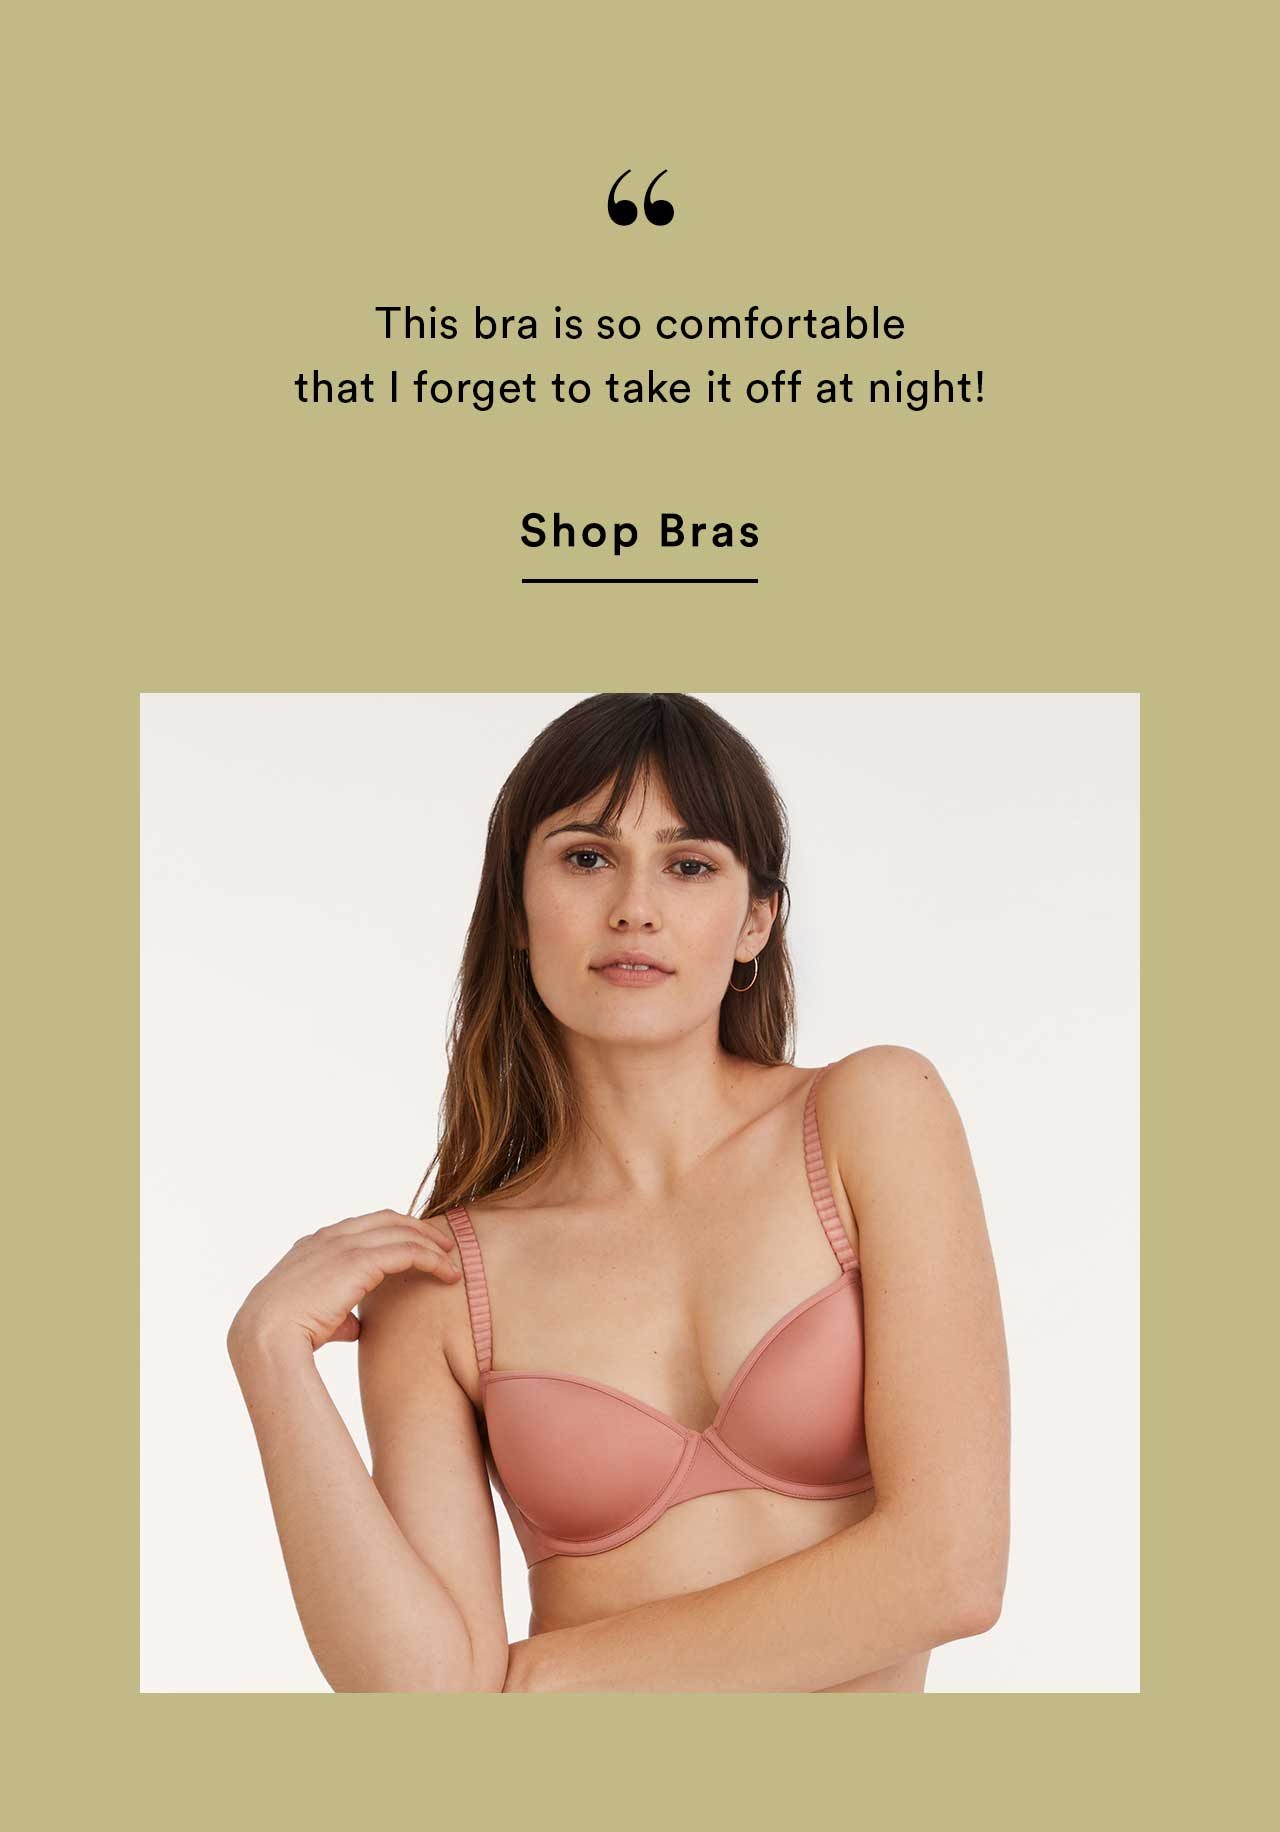 ”This bra is so comfortable that I forget to take it off at night!” | Shop Bras